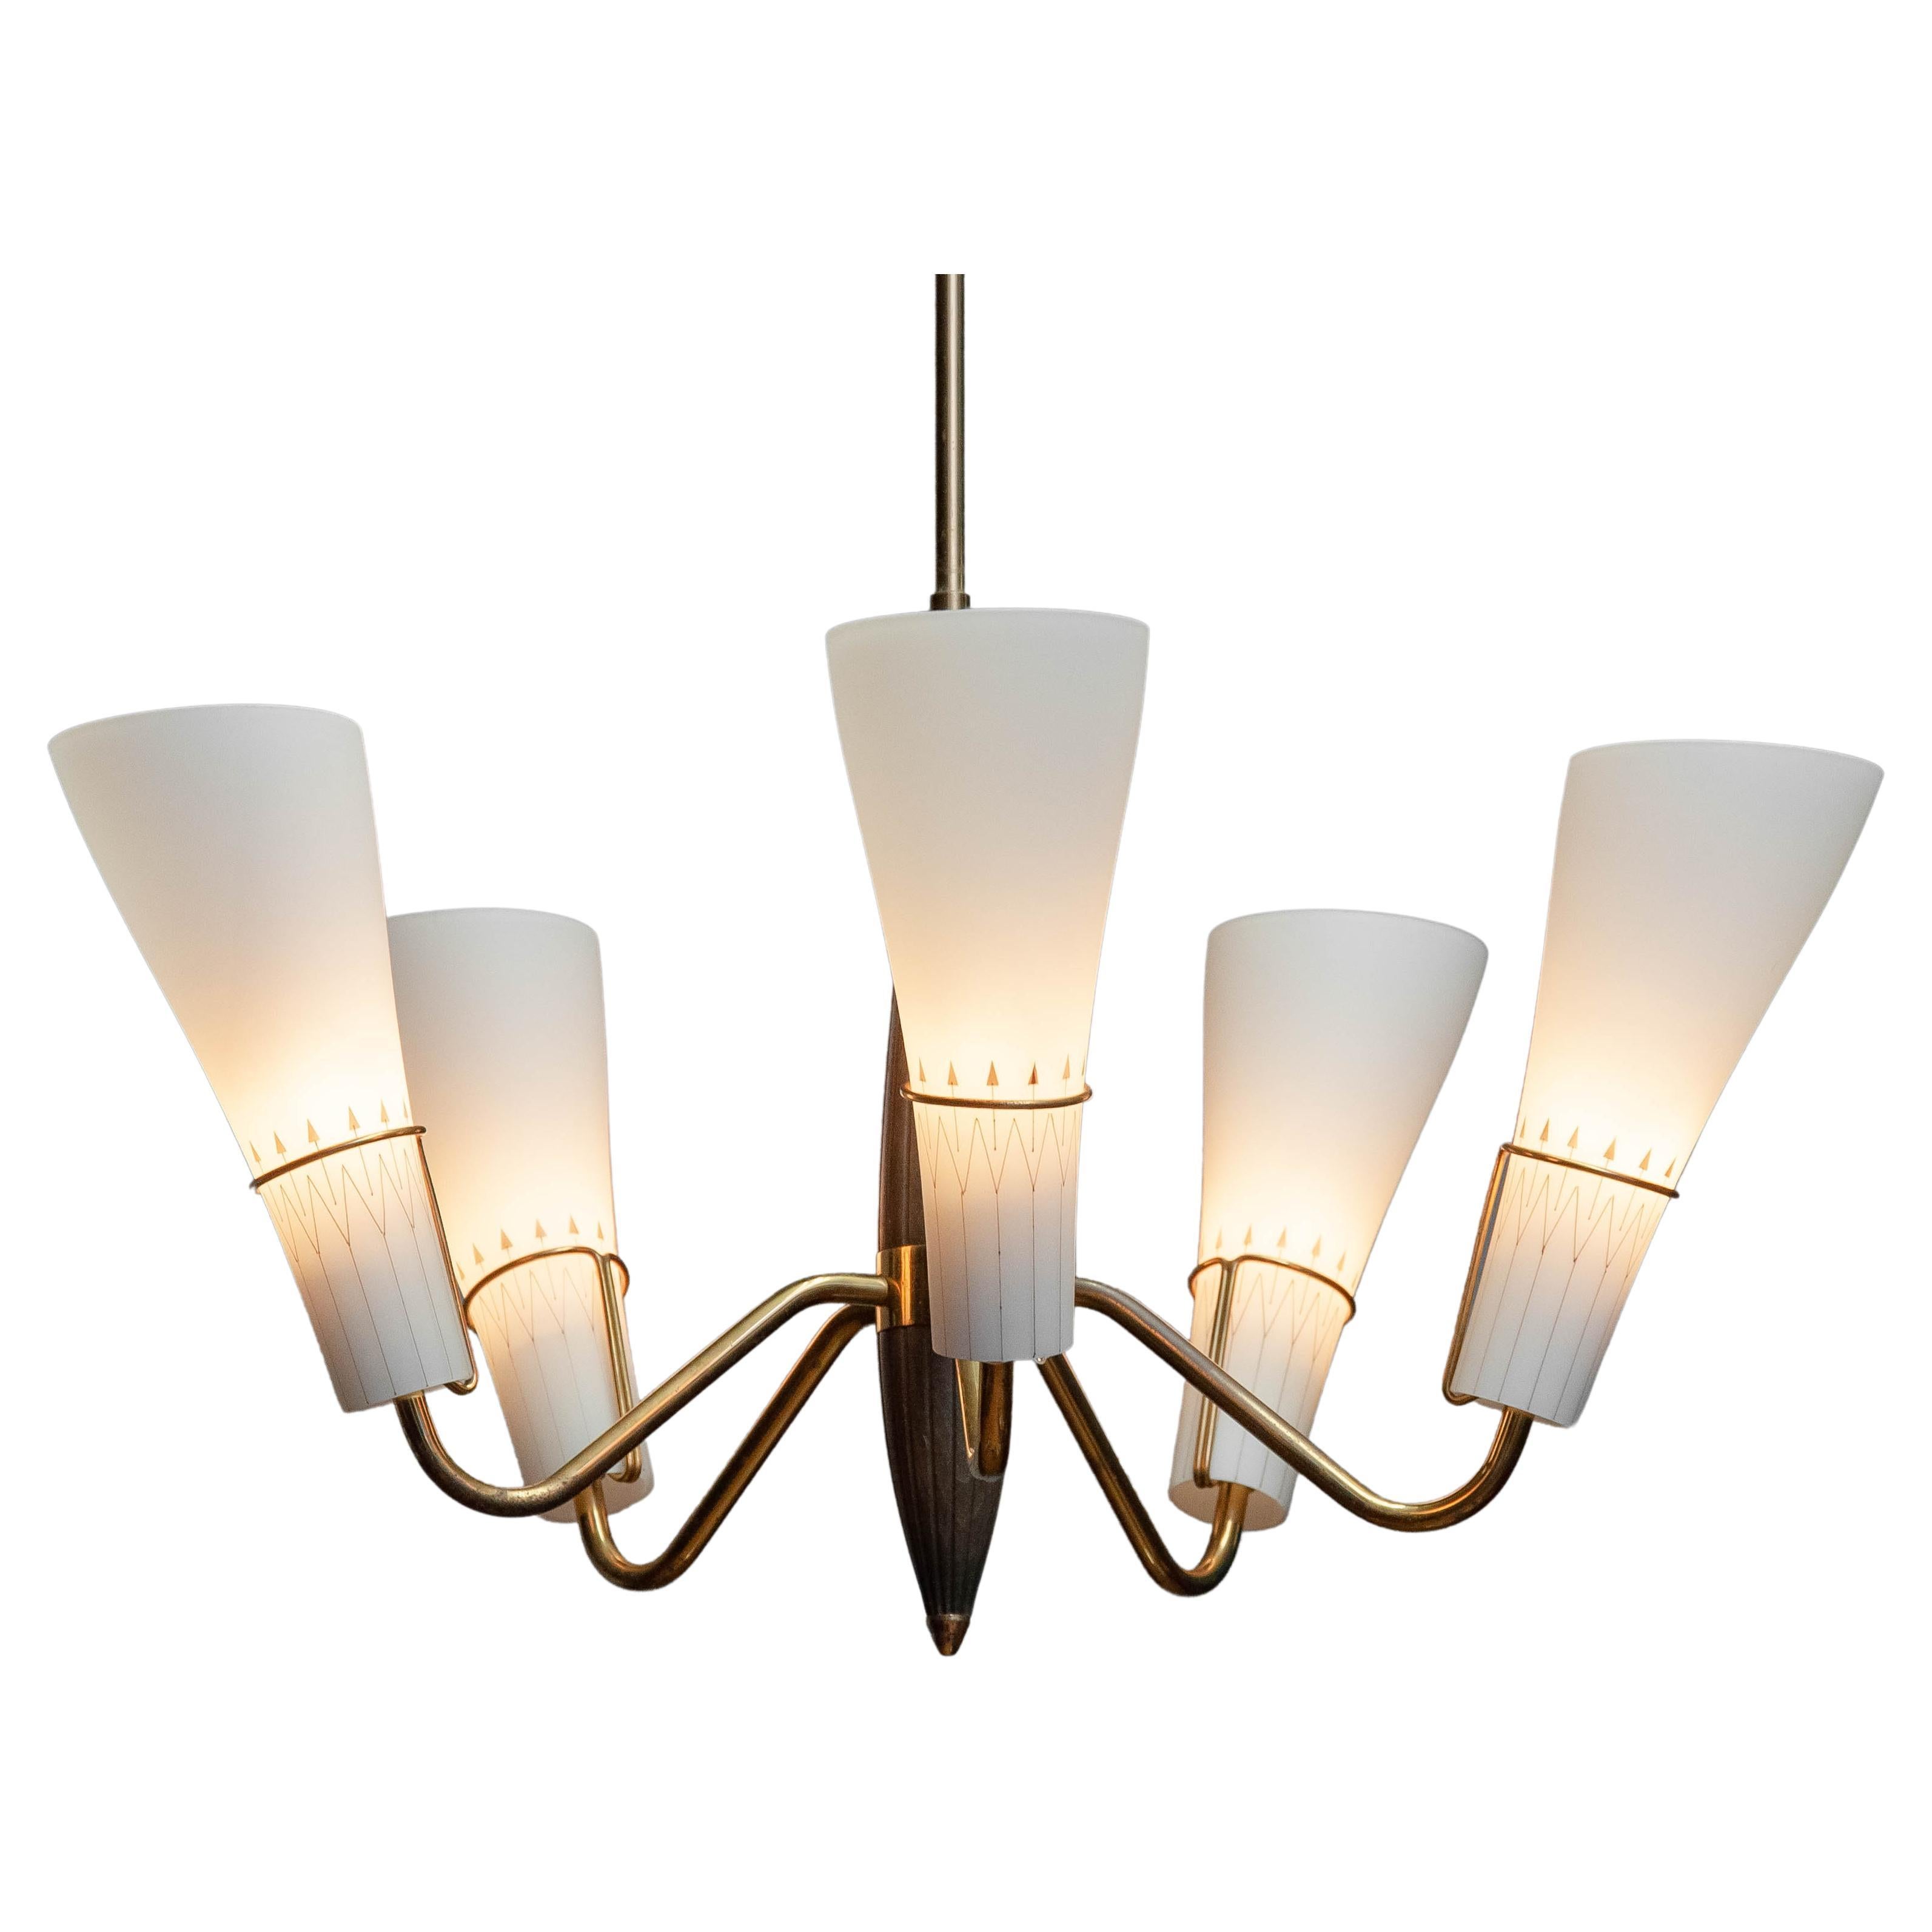 1950s Swedish Brass With Beech Five Arm Chandelier With Frosted Art Glass Shades